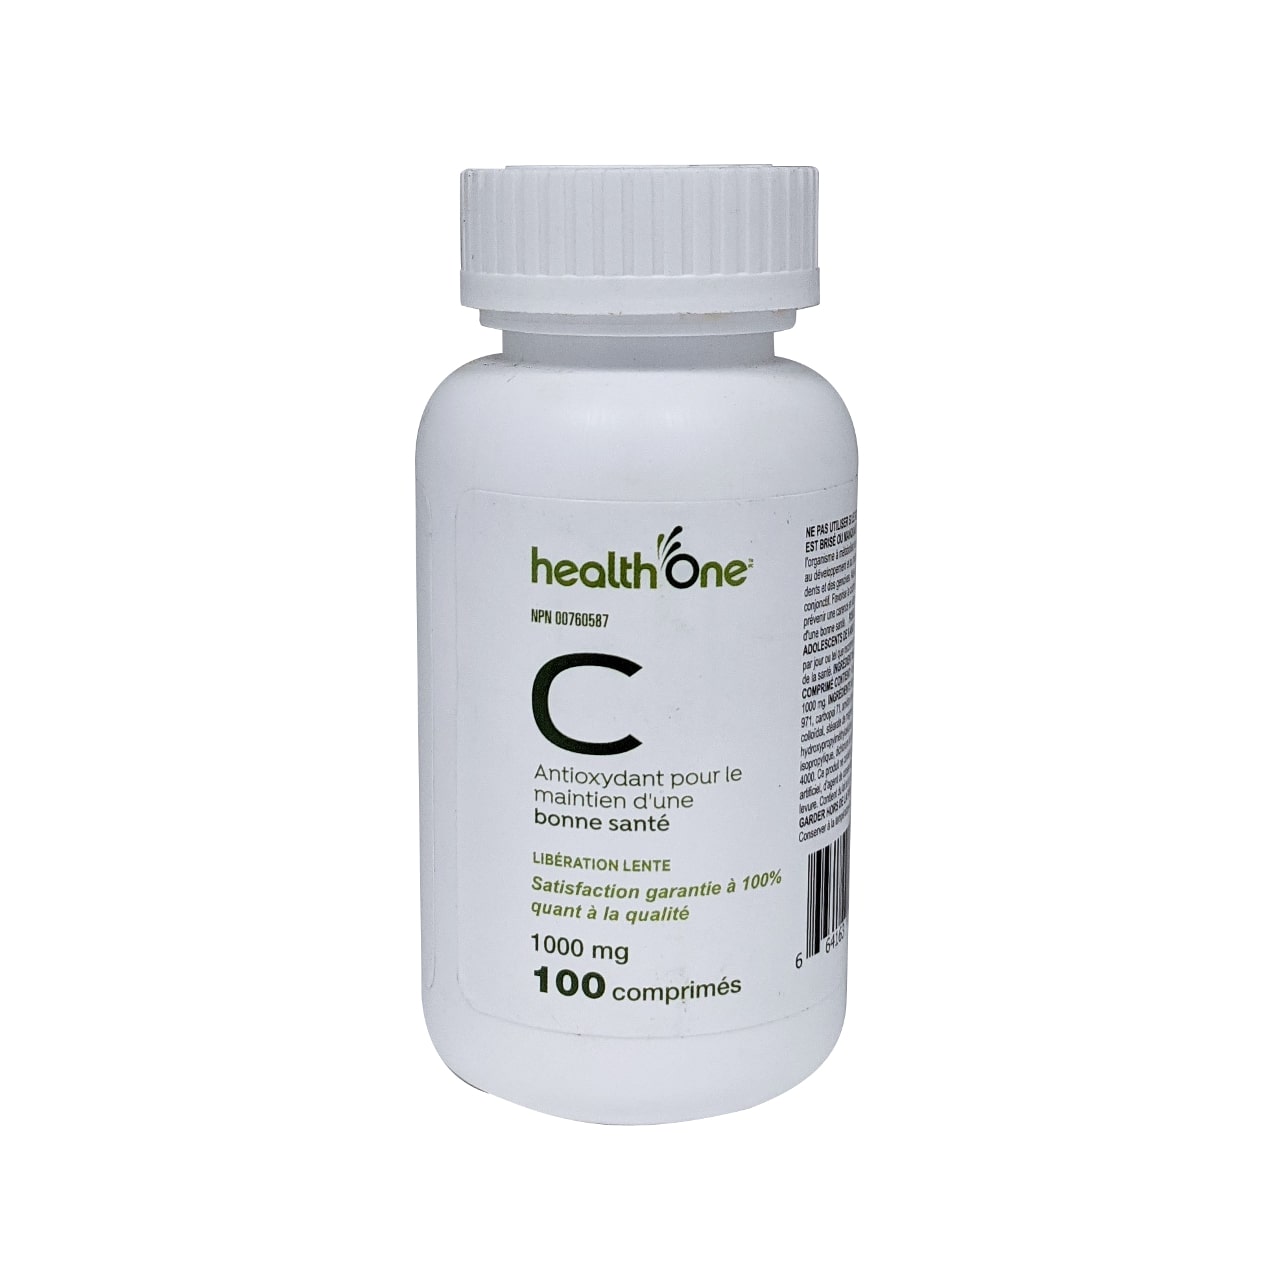 Product label for health One Vitamin C 1000mg Timed Release in French